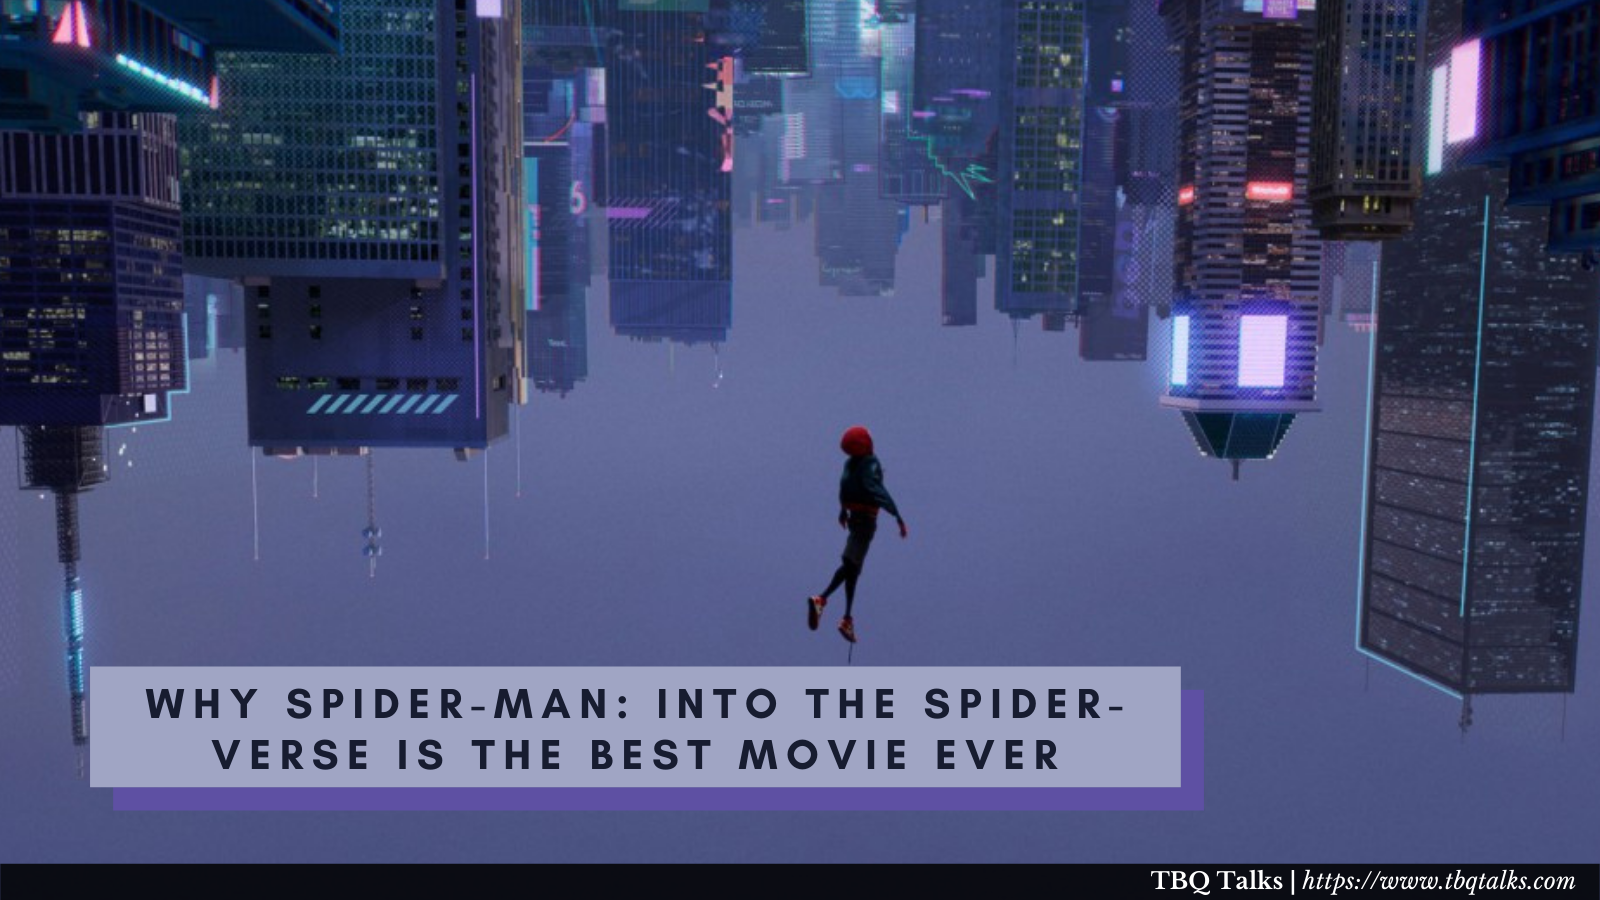 My Name Is Peter Parker Scene - Spider-Man: Into the Spider-Verse